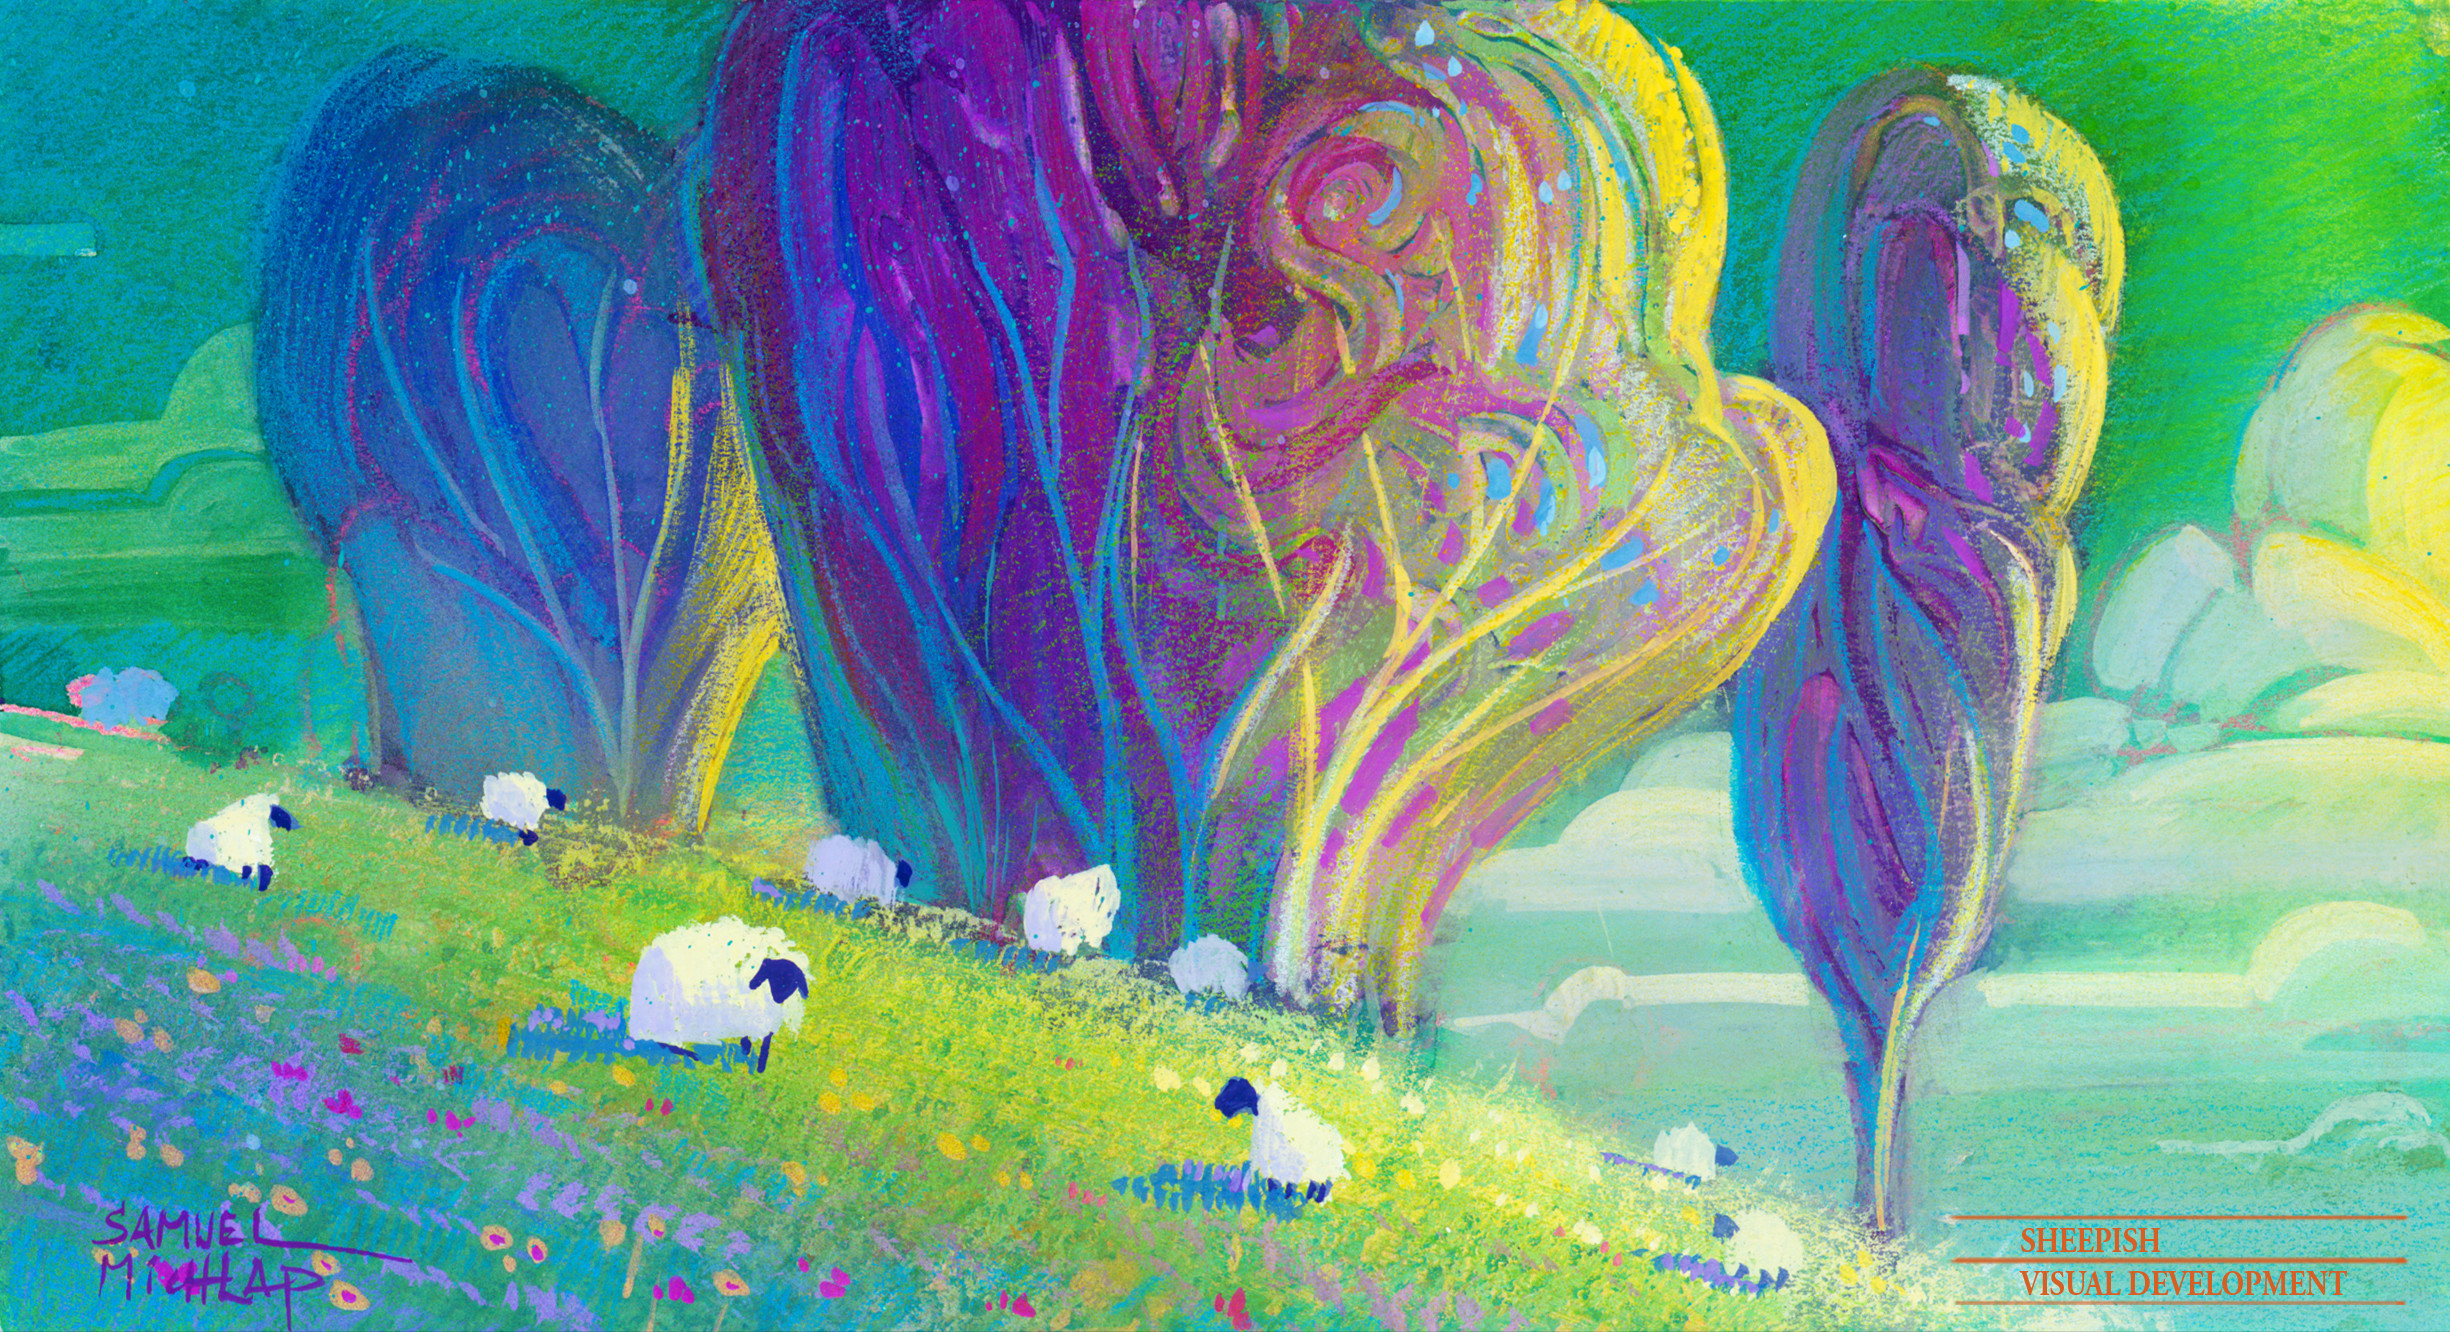 Sheep shapes everywhere was one way to push design. Gouache and color pencil.